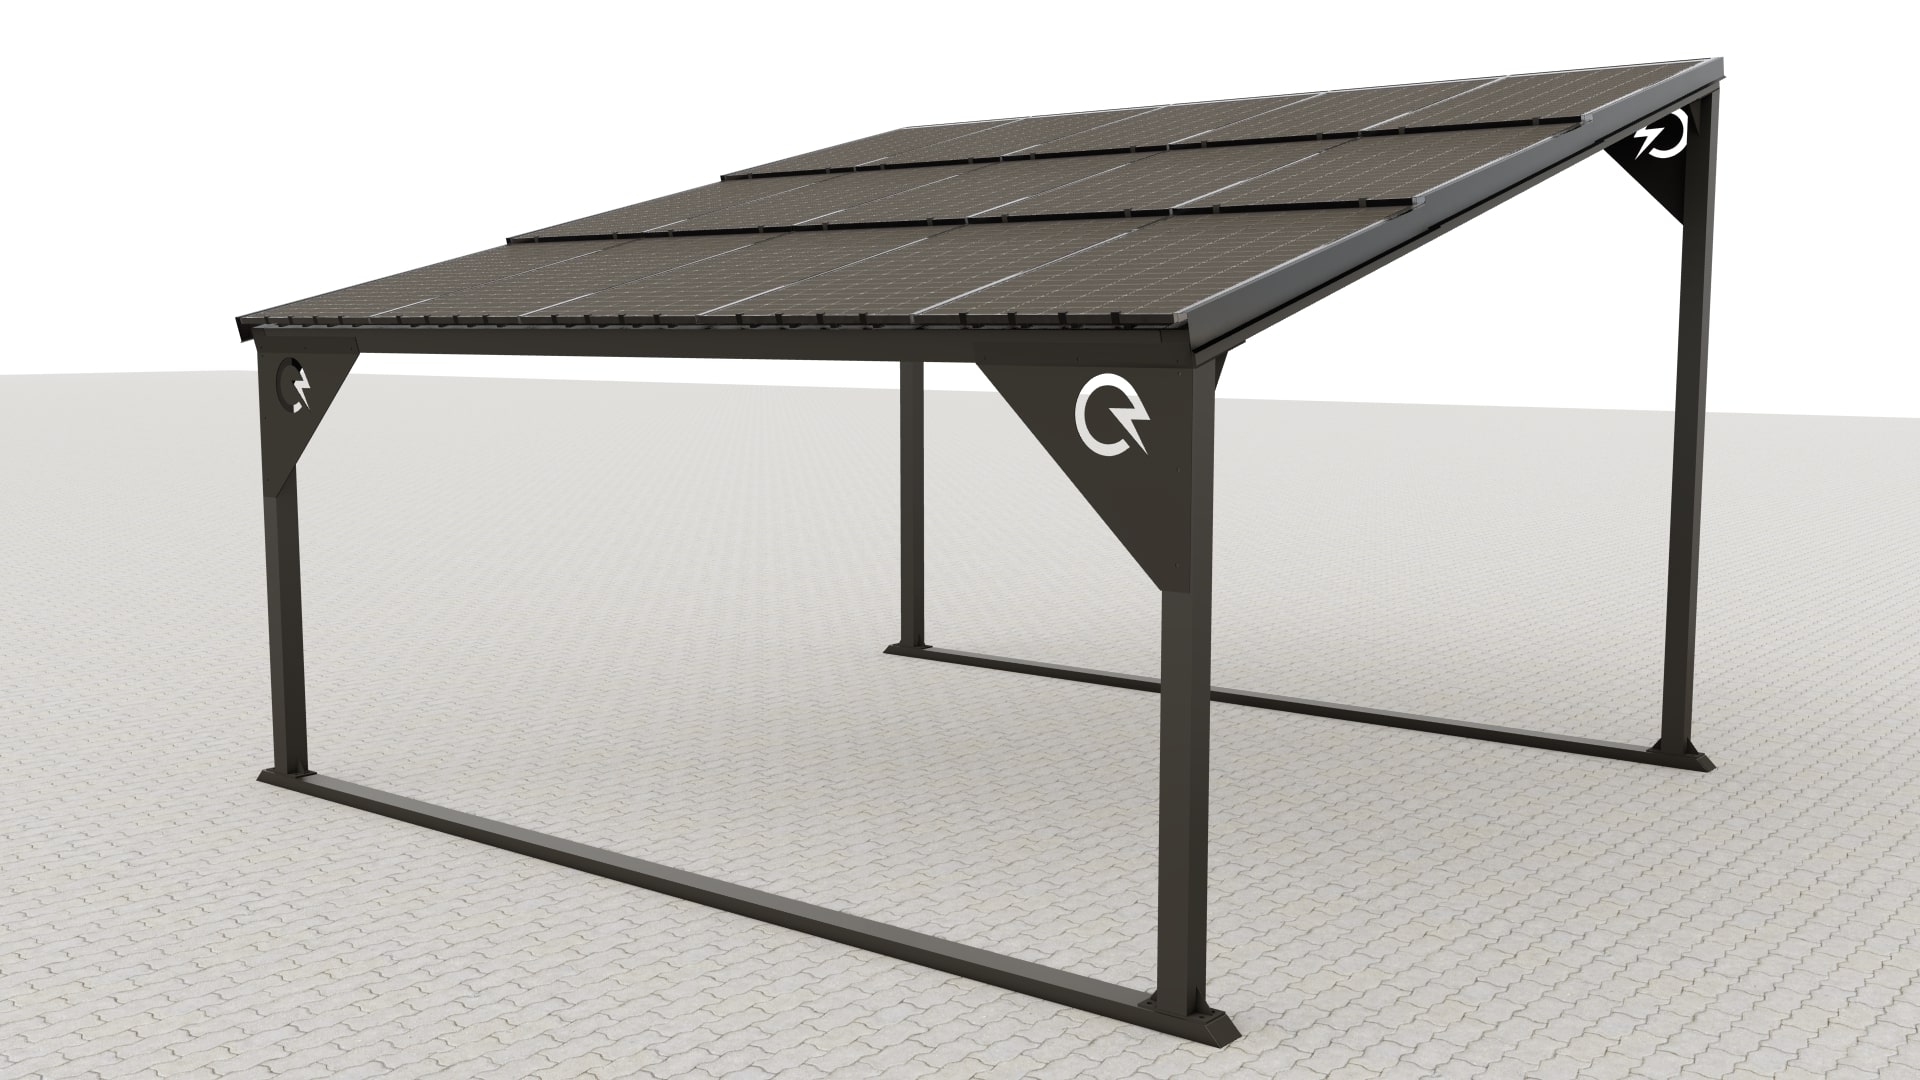 solarstone solar carport classic duo without clt cladding